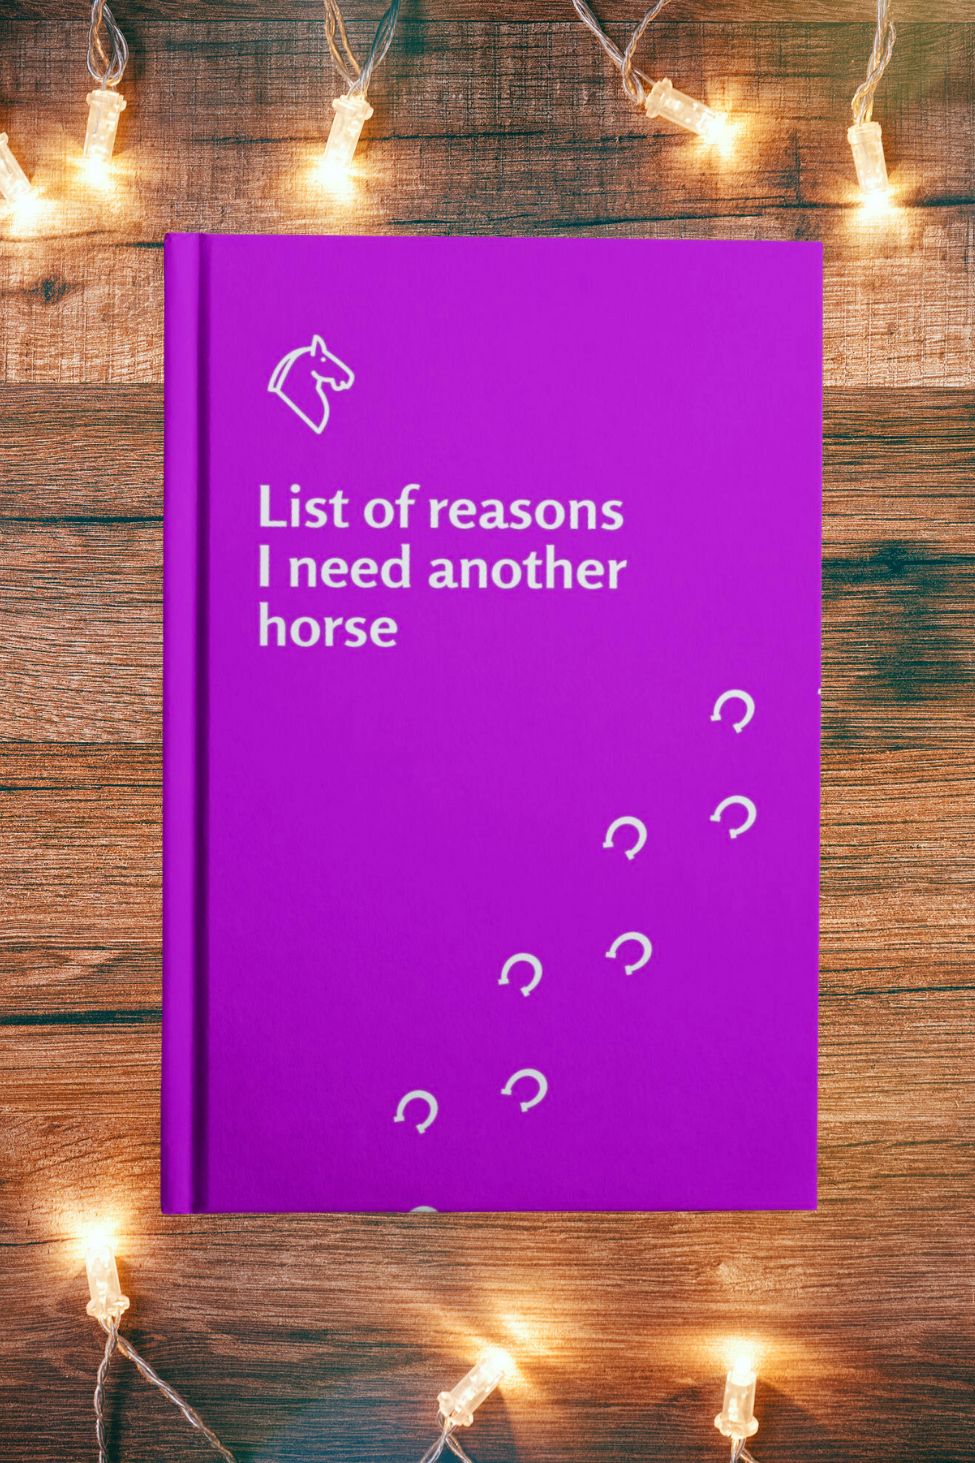 List of reasons I need another horse notebook - Hardcover lined notebook